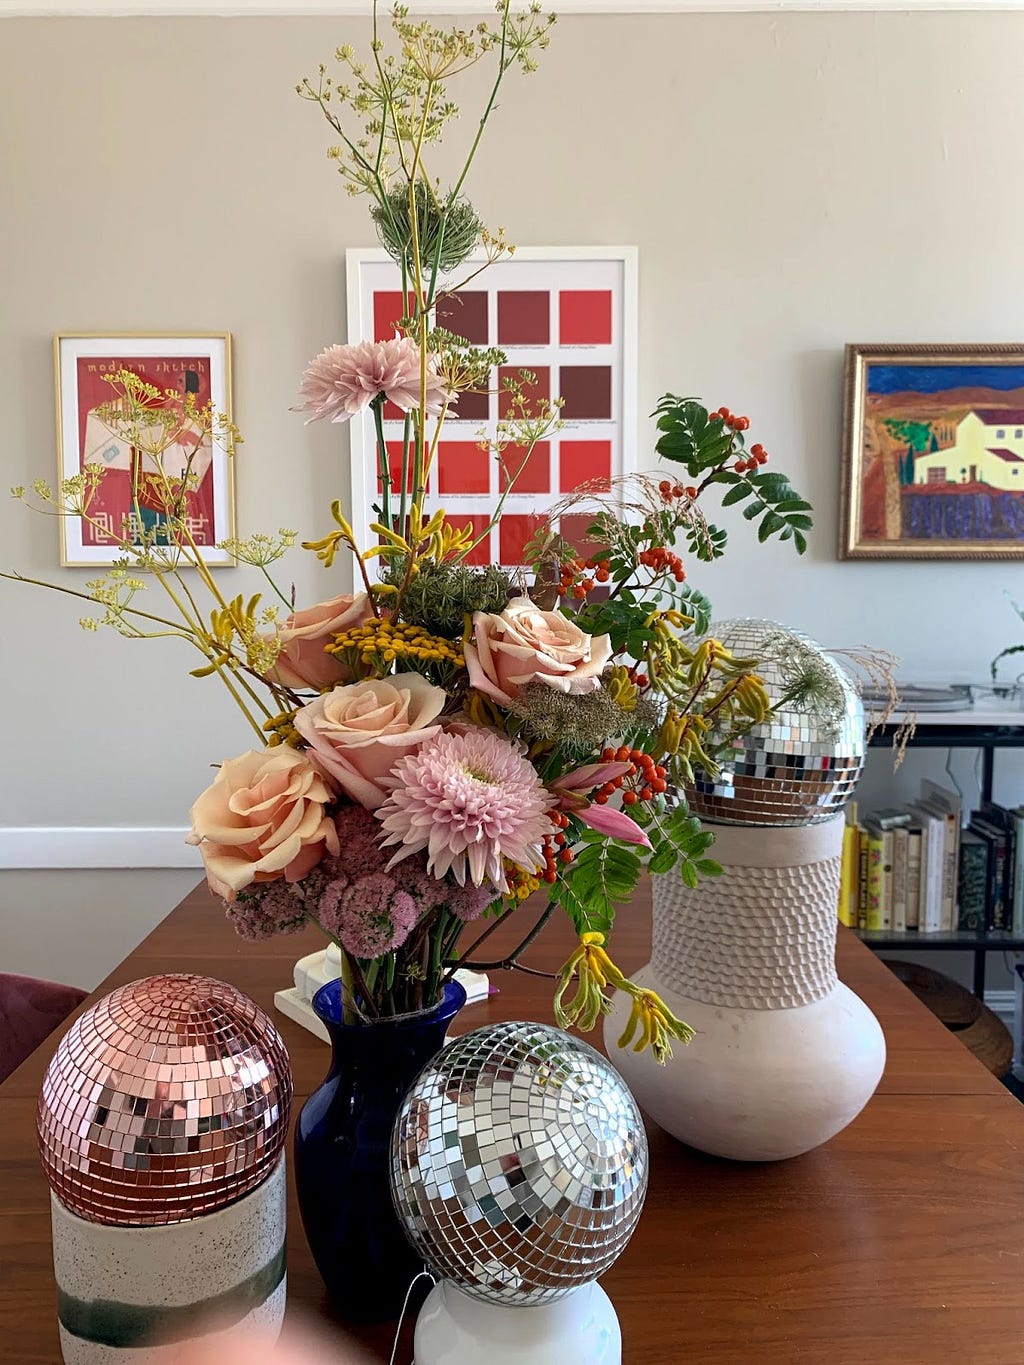 A large sunny bouquet of flowers, including pink roses and other pink and red flowers. The bouquet is on a table surrounded by small disco balls, and paintings are on the wall behind them.